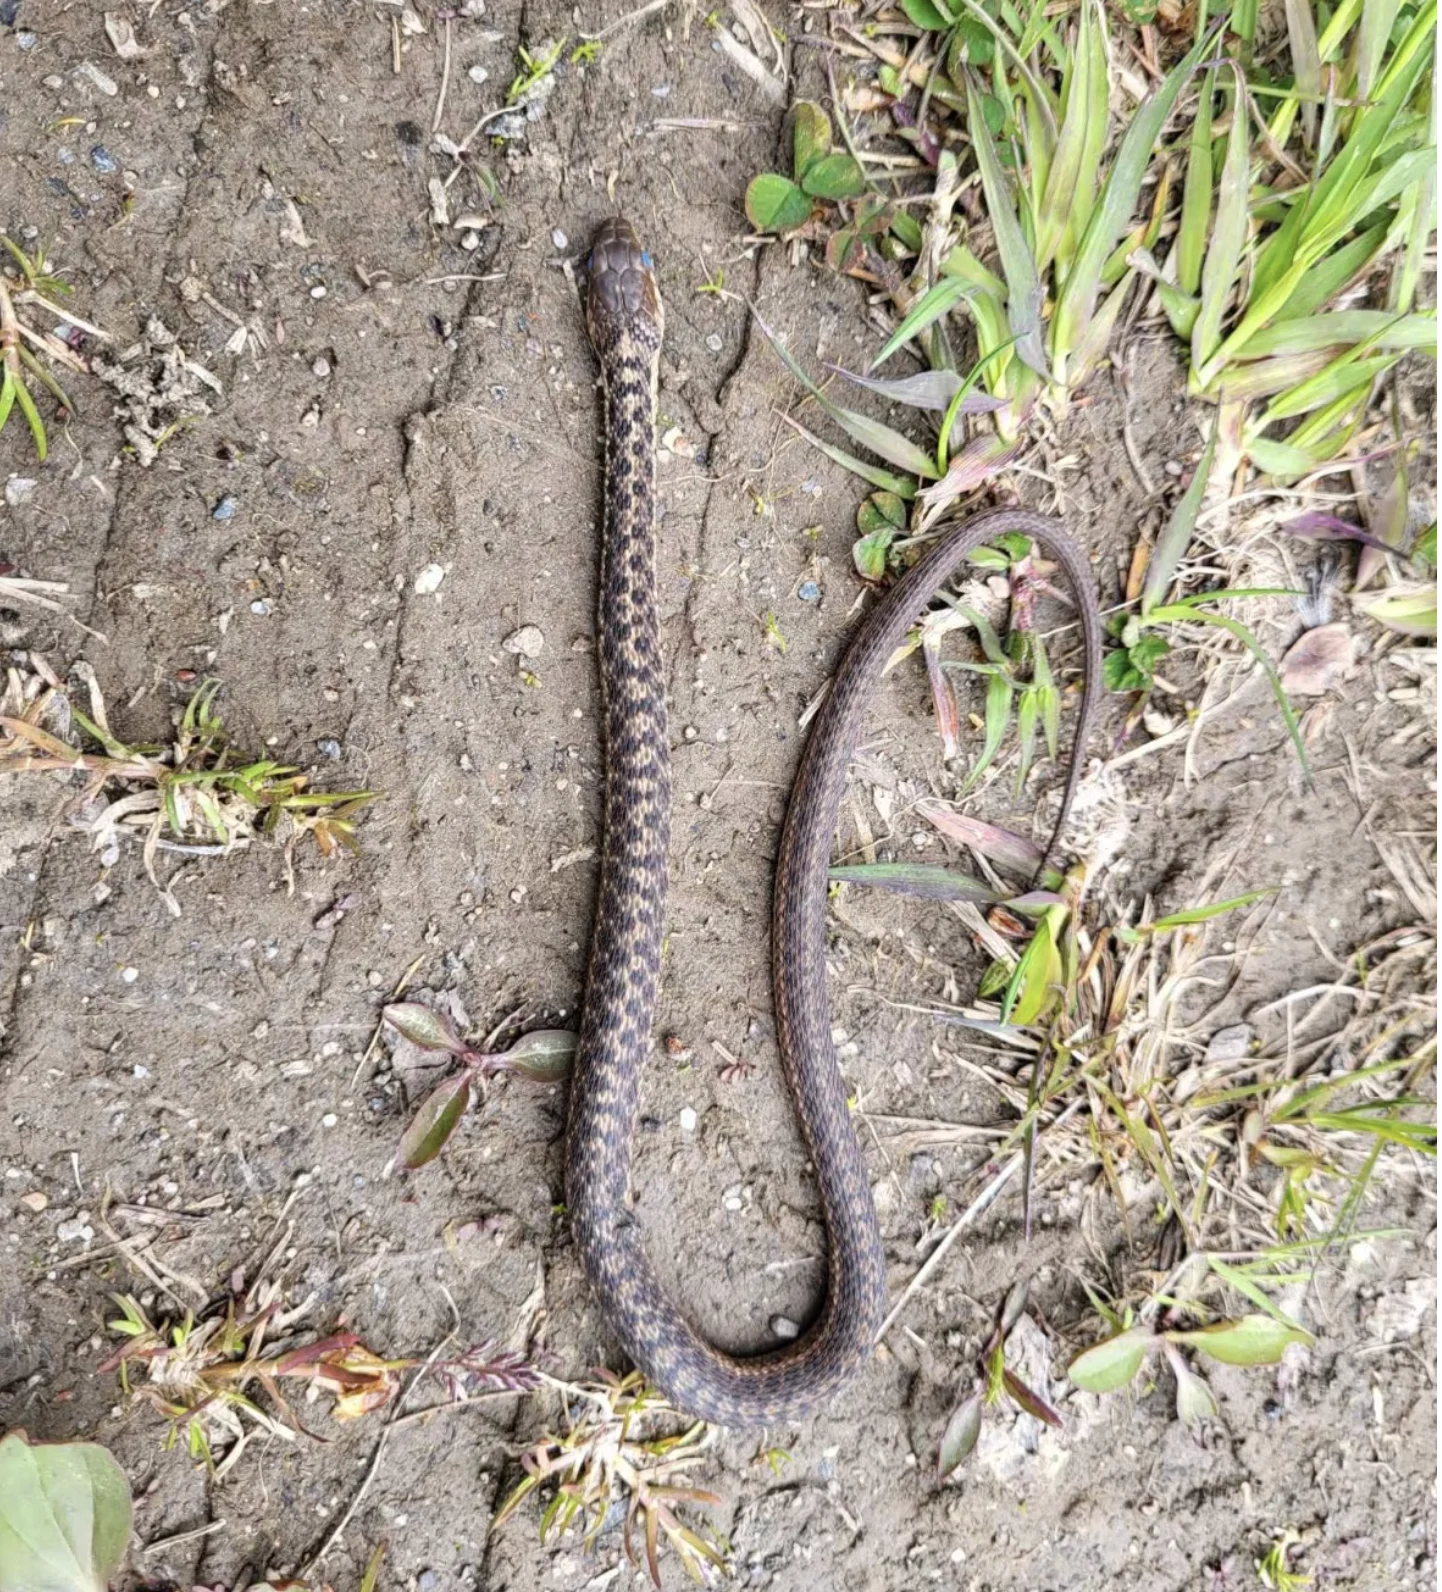 This garter snake was found in the Trout River area. (Submitted by Julia Riley)